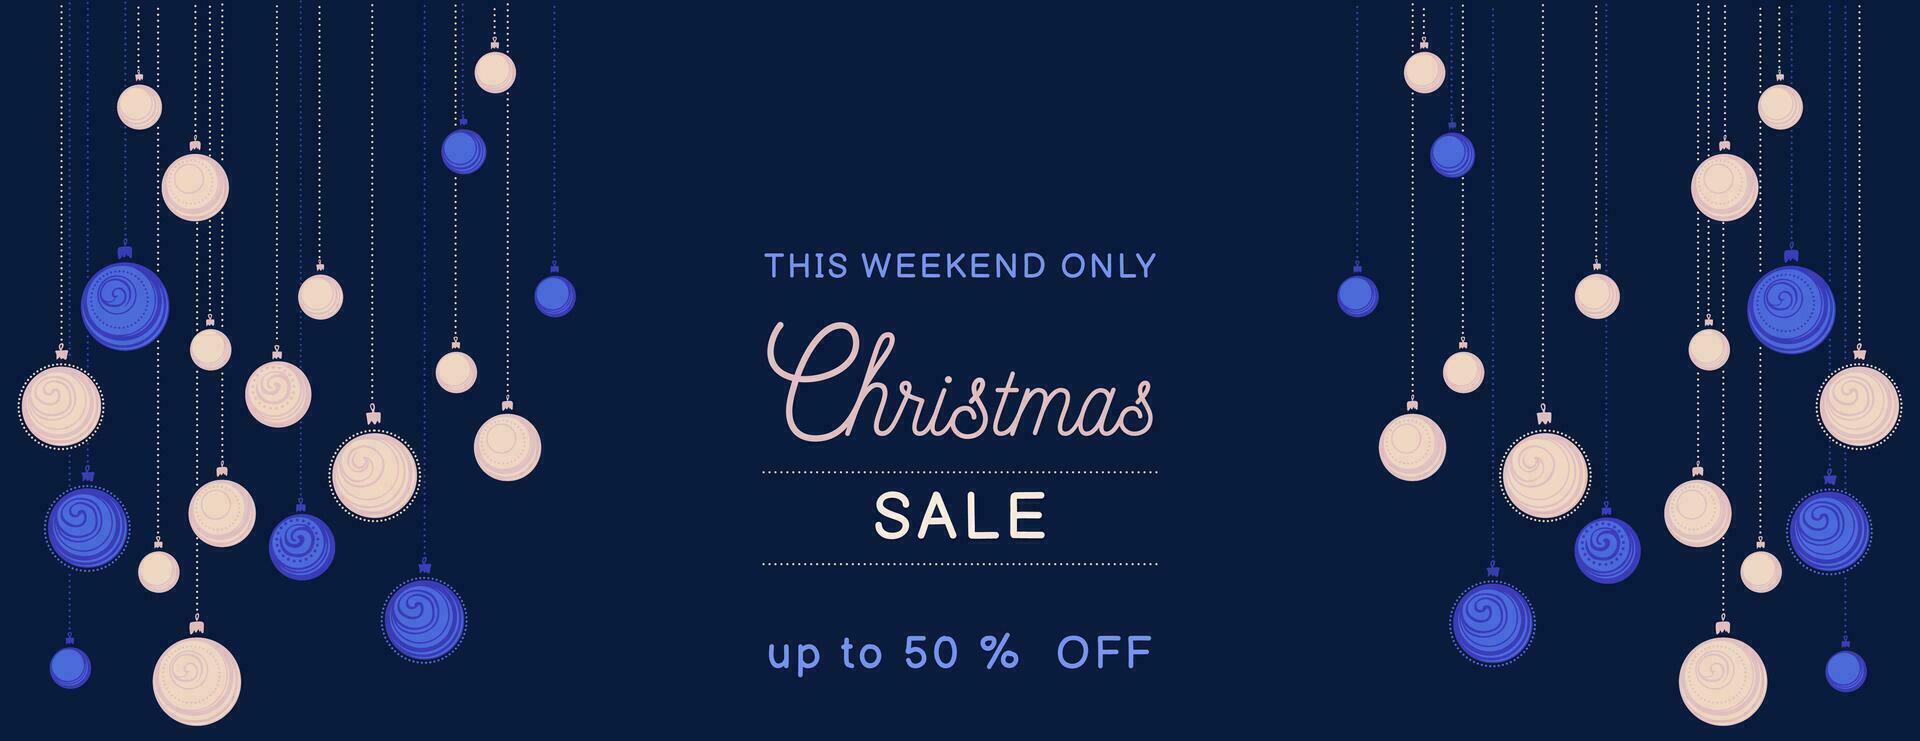 Christmas sale background. Vector Christmas balls on a black blue background. Horizontal border with copy space. Suitable for email header, social media post, advertising, events and page